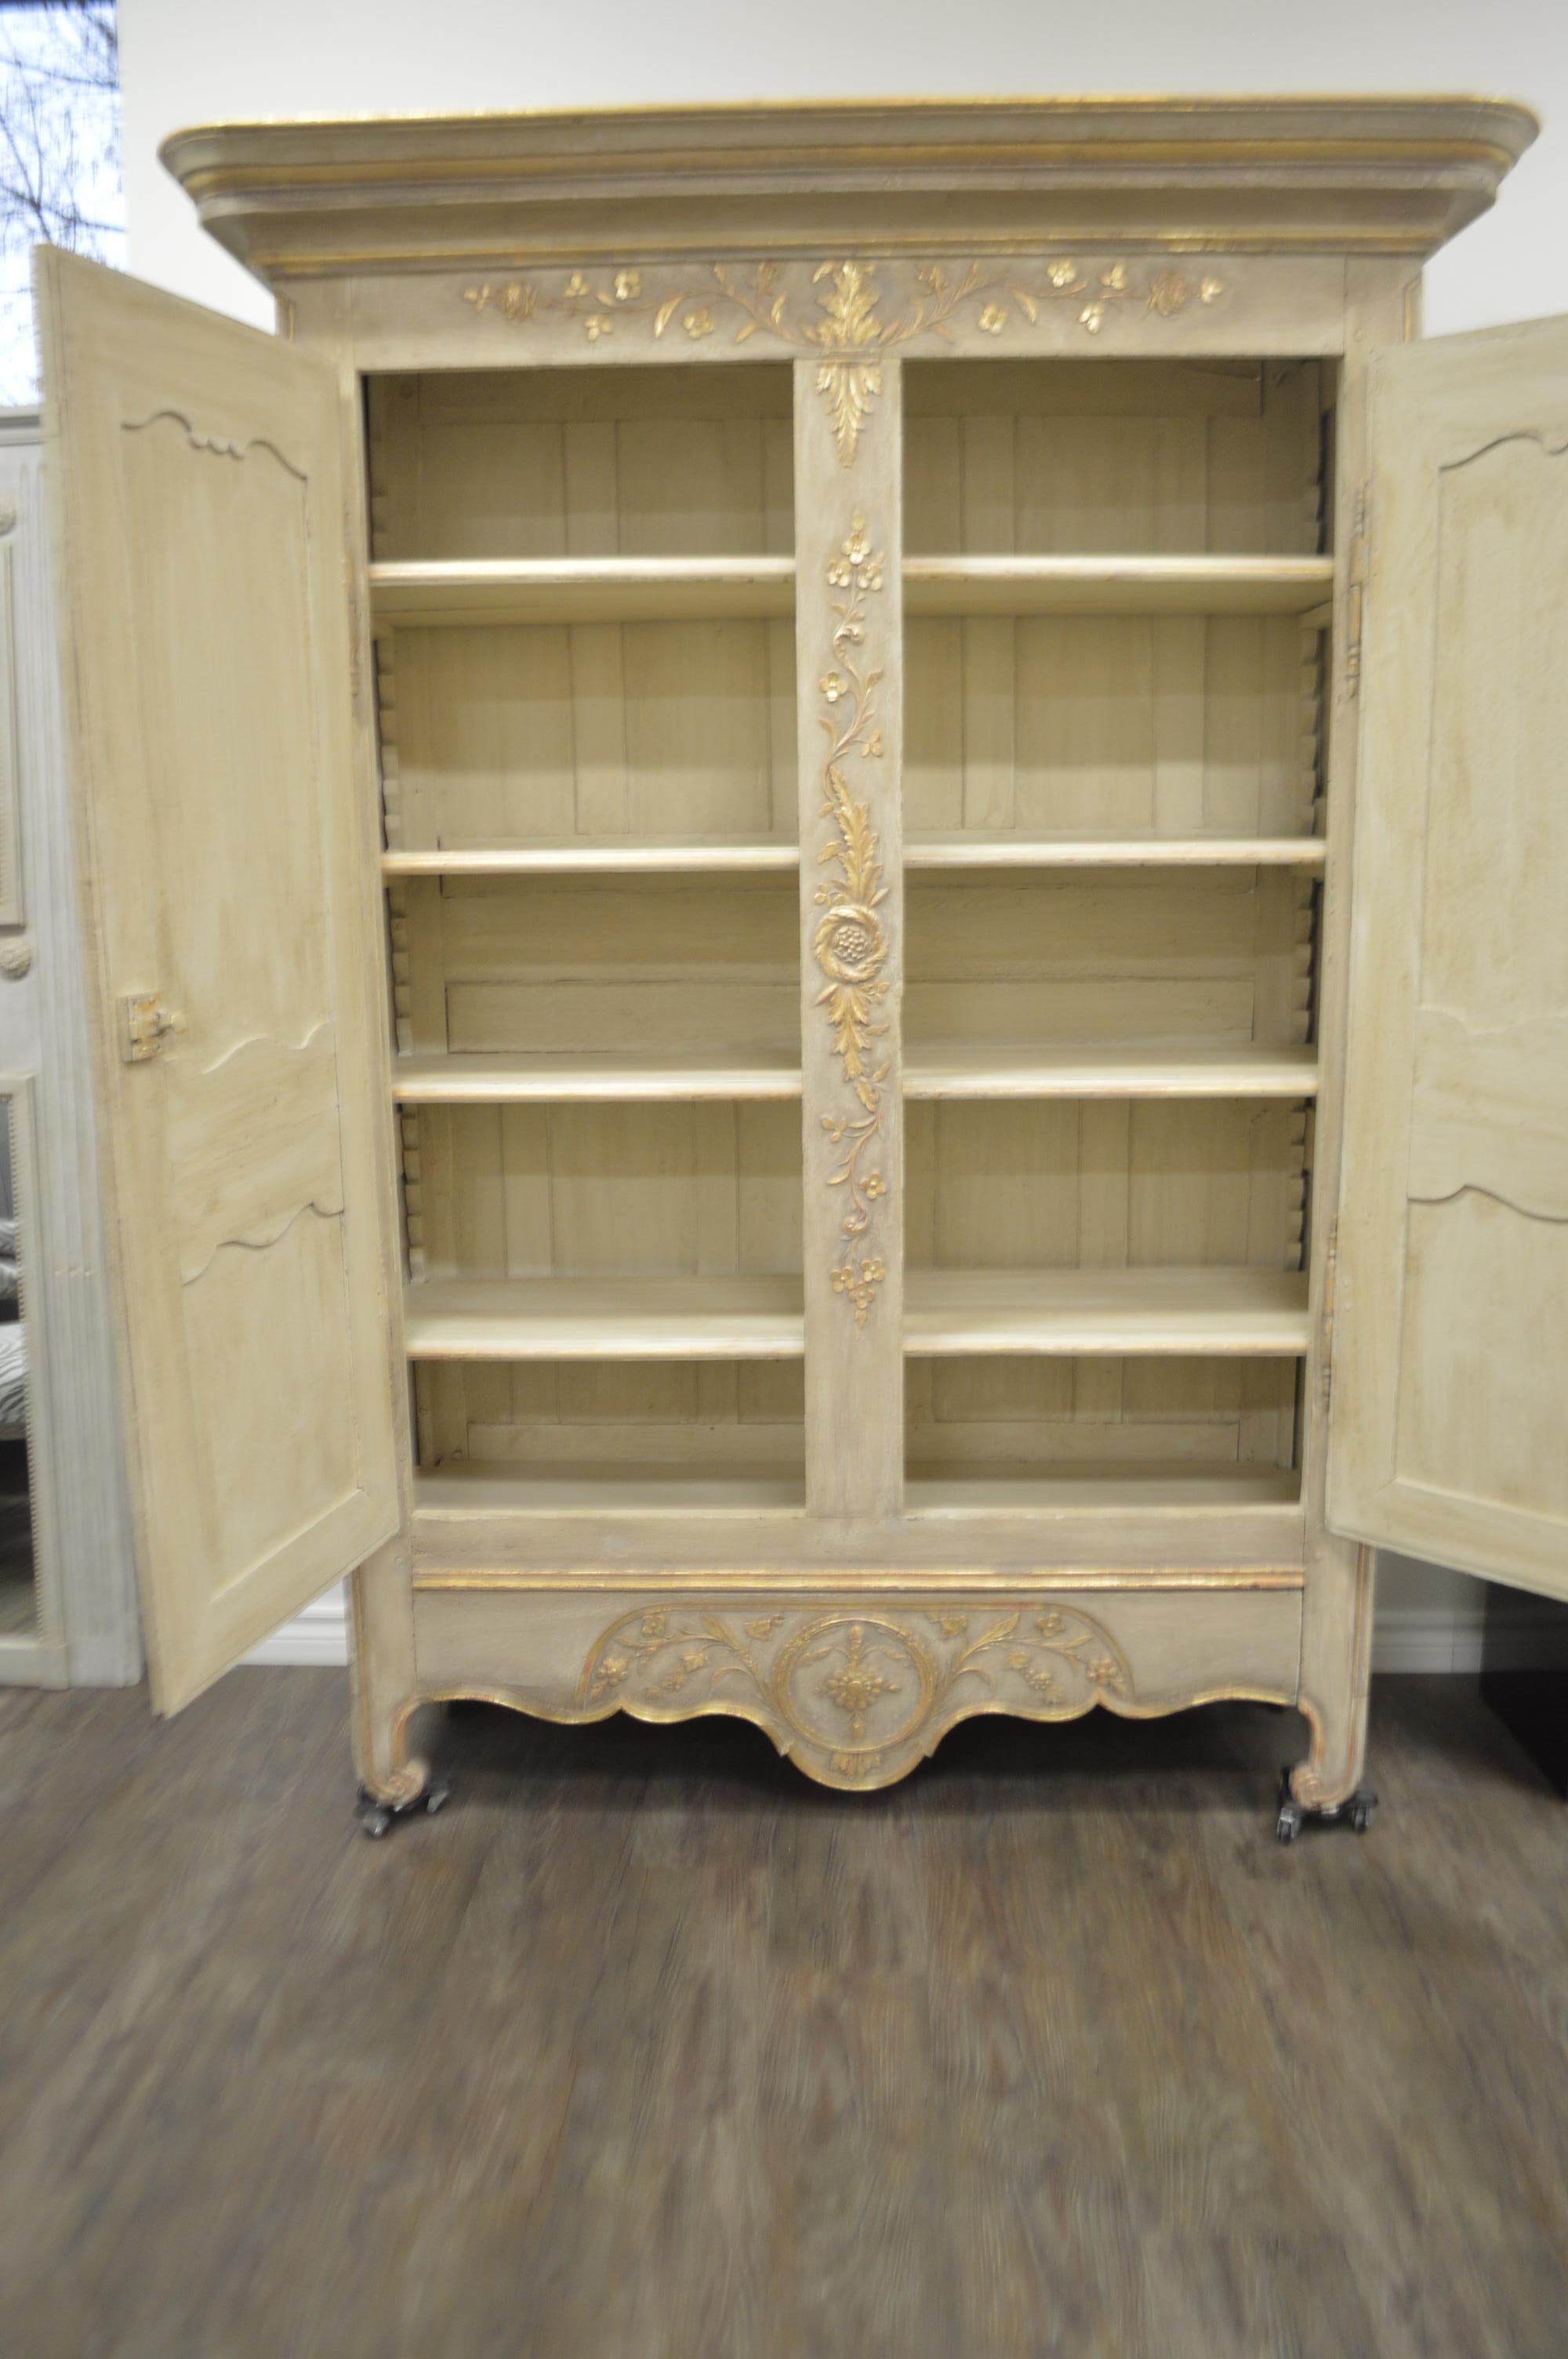 Oak Louis XV Style Highly Decorative Painted Armoire with Gilt Details, 5 Shelves